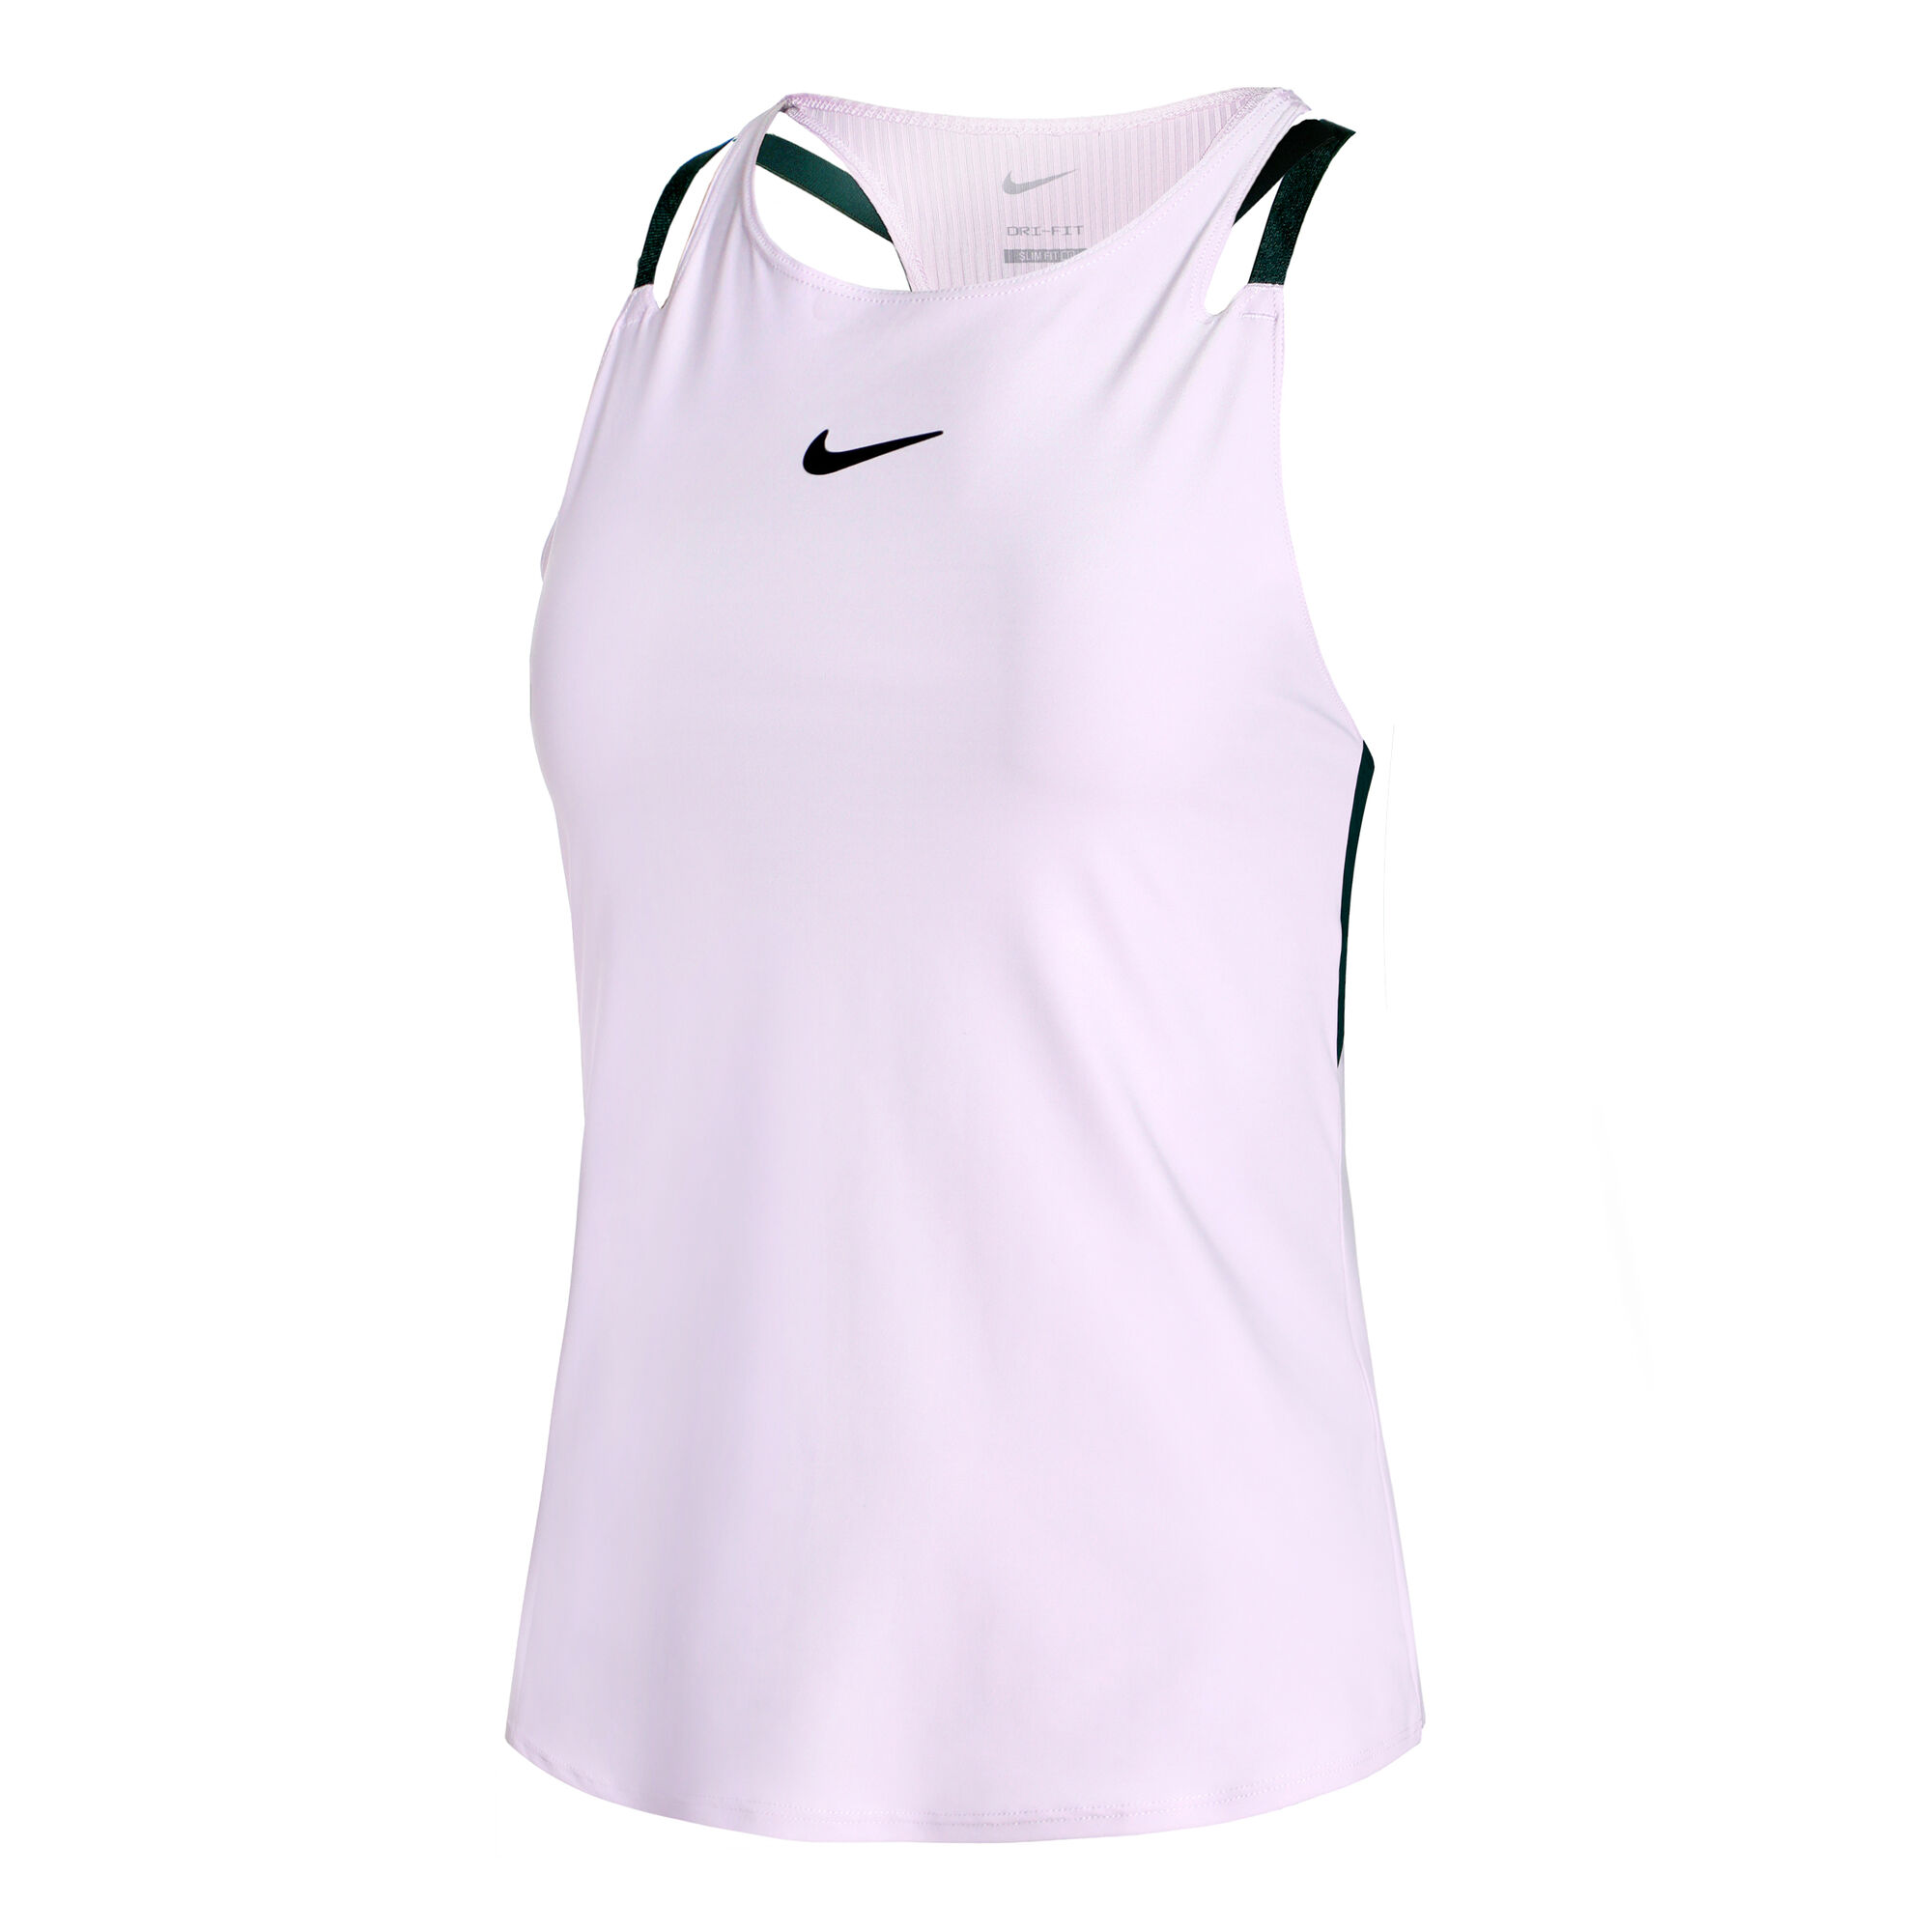 Nike Women's Dri-Fit Infinite Tank Top BV3909 500 Size Small Retail $65 New  with tag